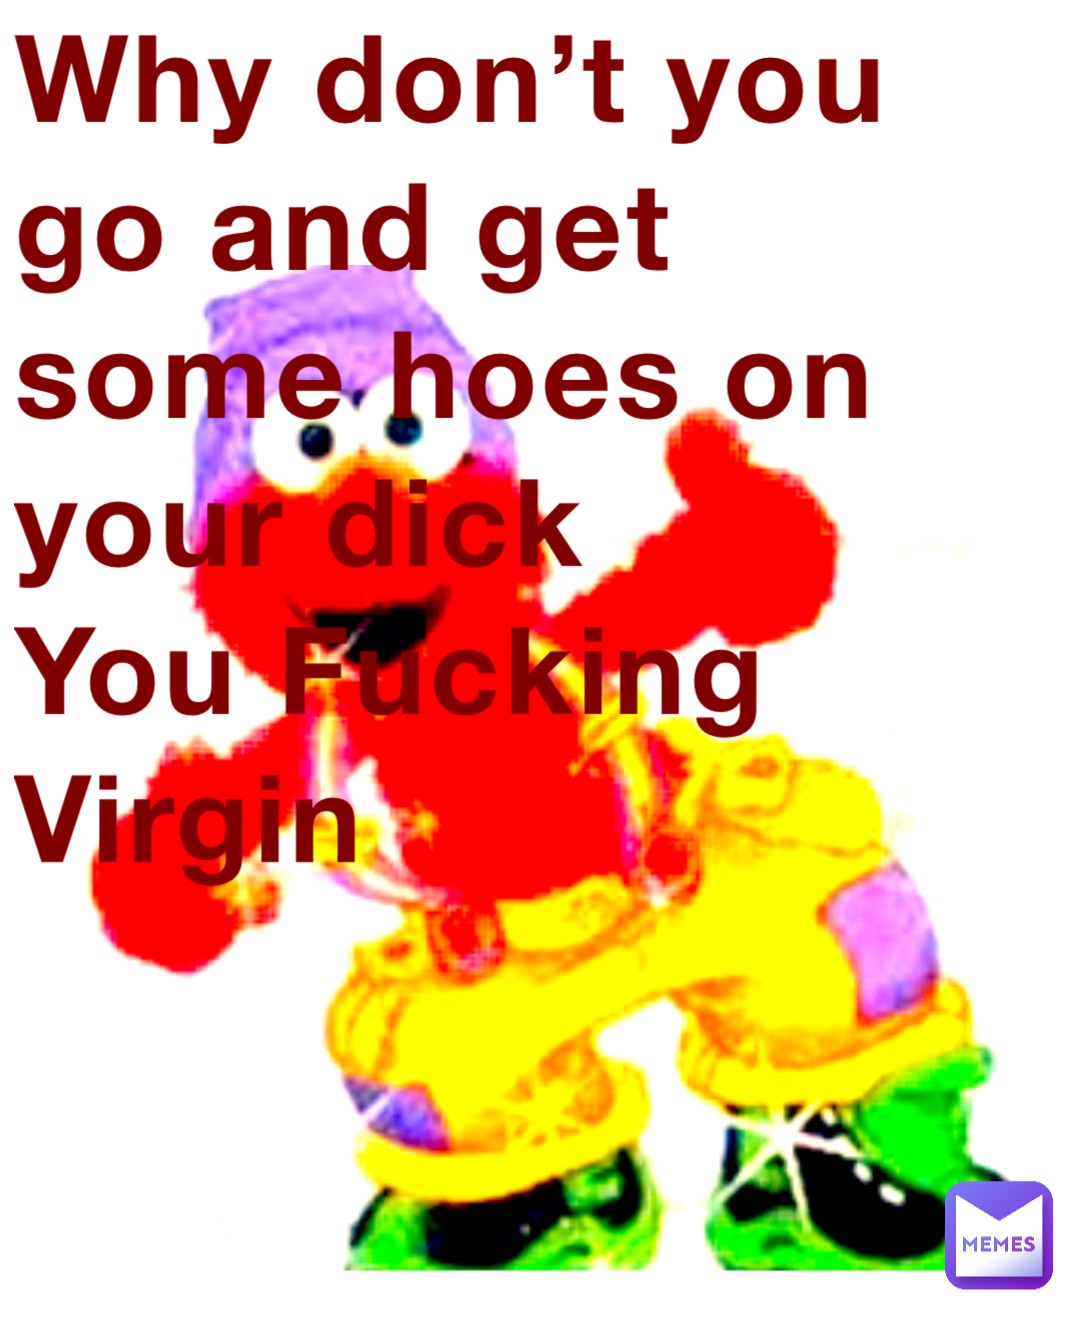 Why don’t you go and get some hoes on your dick
You Fucking Virgin